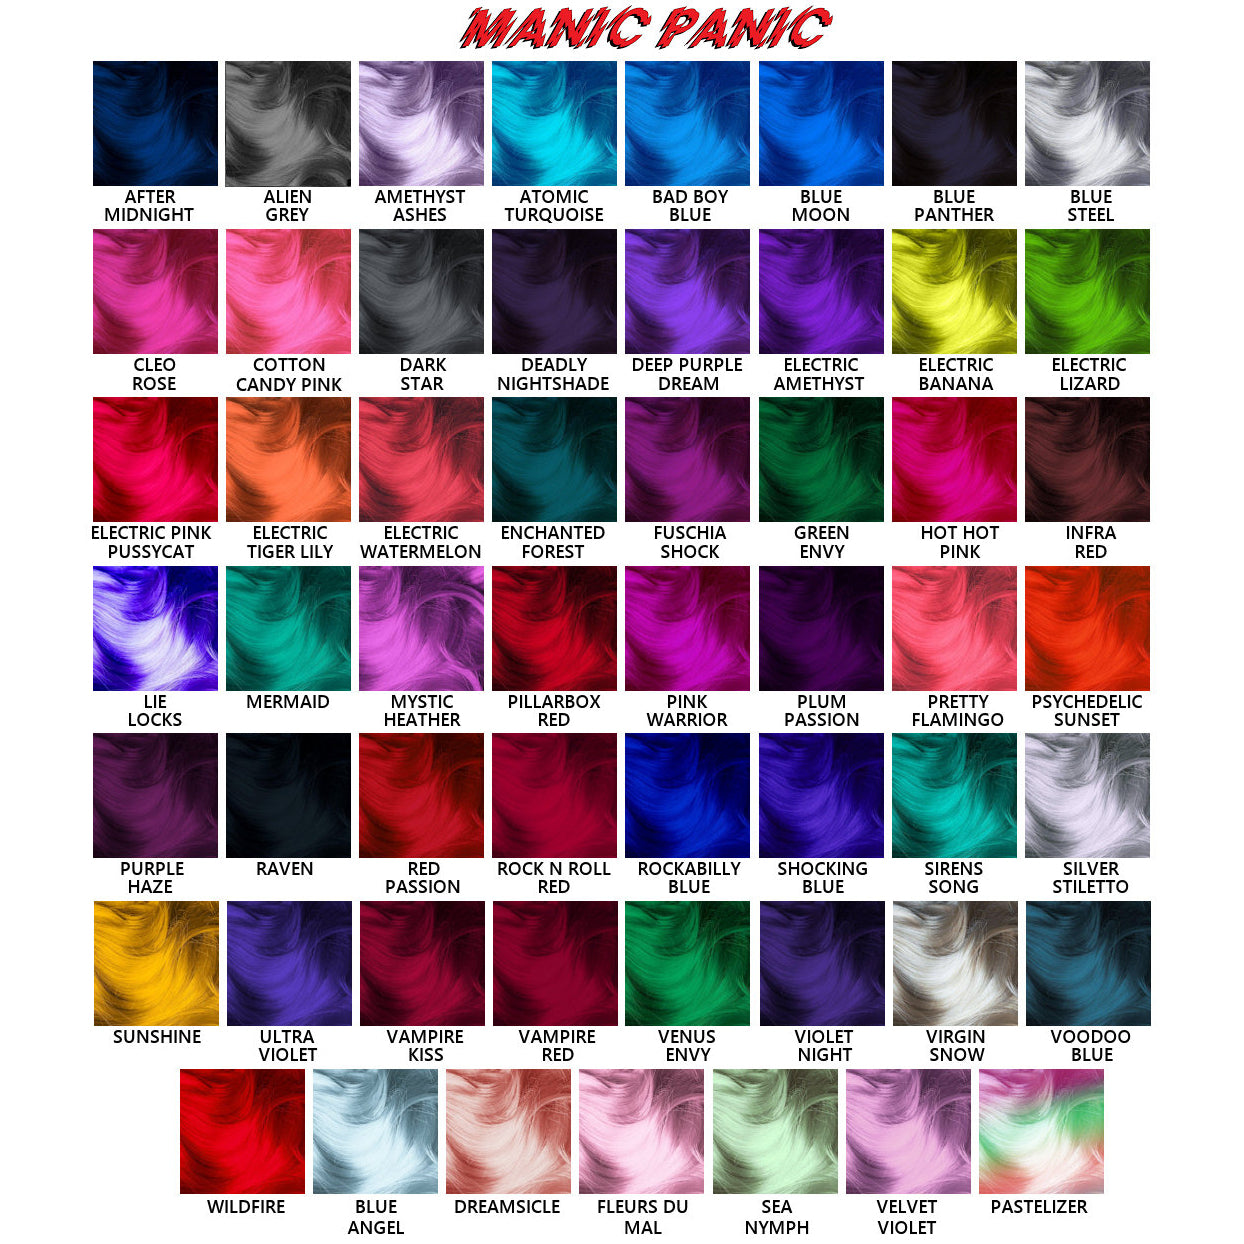 Manic Panic Classic After Midnight dye hair colour before and after shade sheet